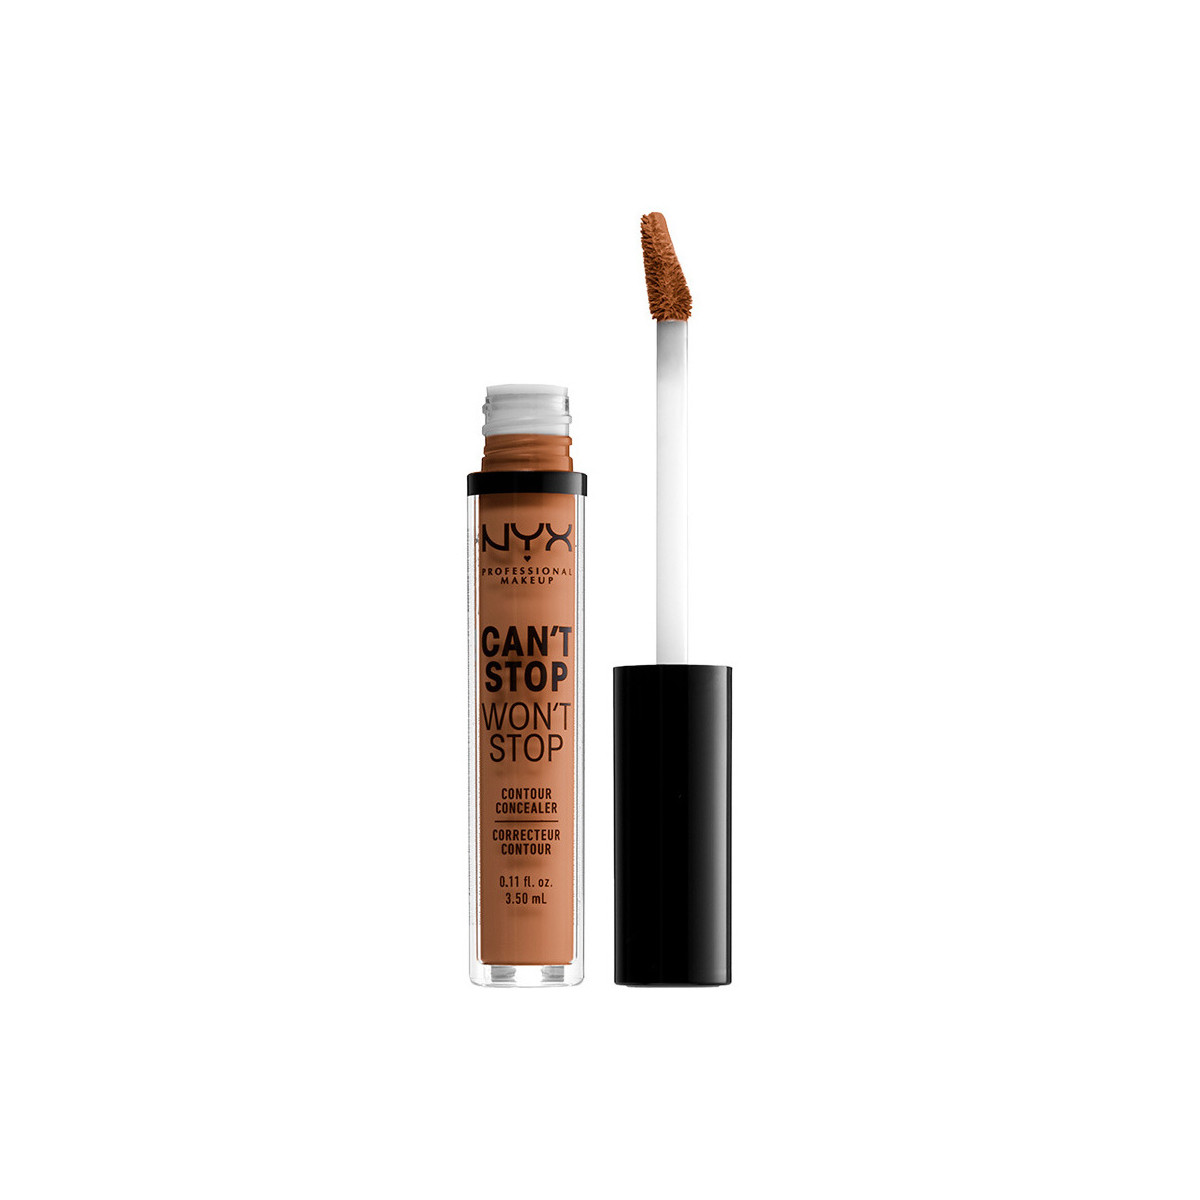 Beauty Make-up & Foundation  Nyx Professional Make Up Can't Stop Won't Stop Contour Concealer mahogany 